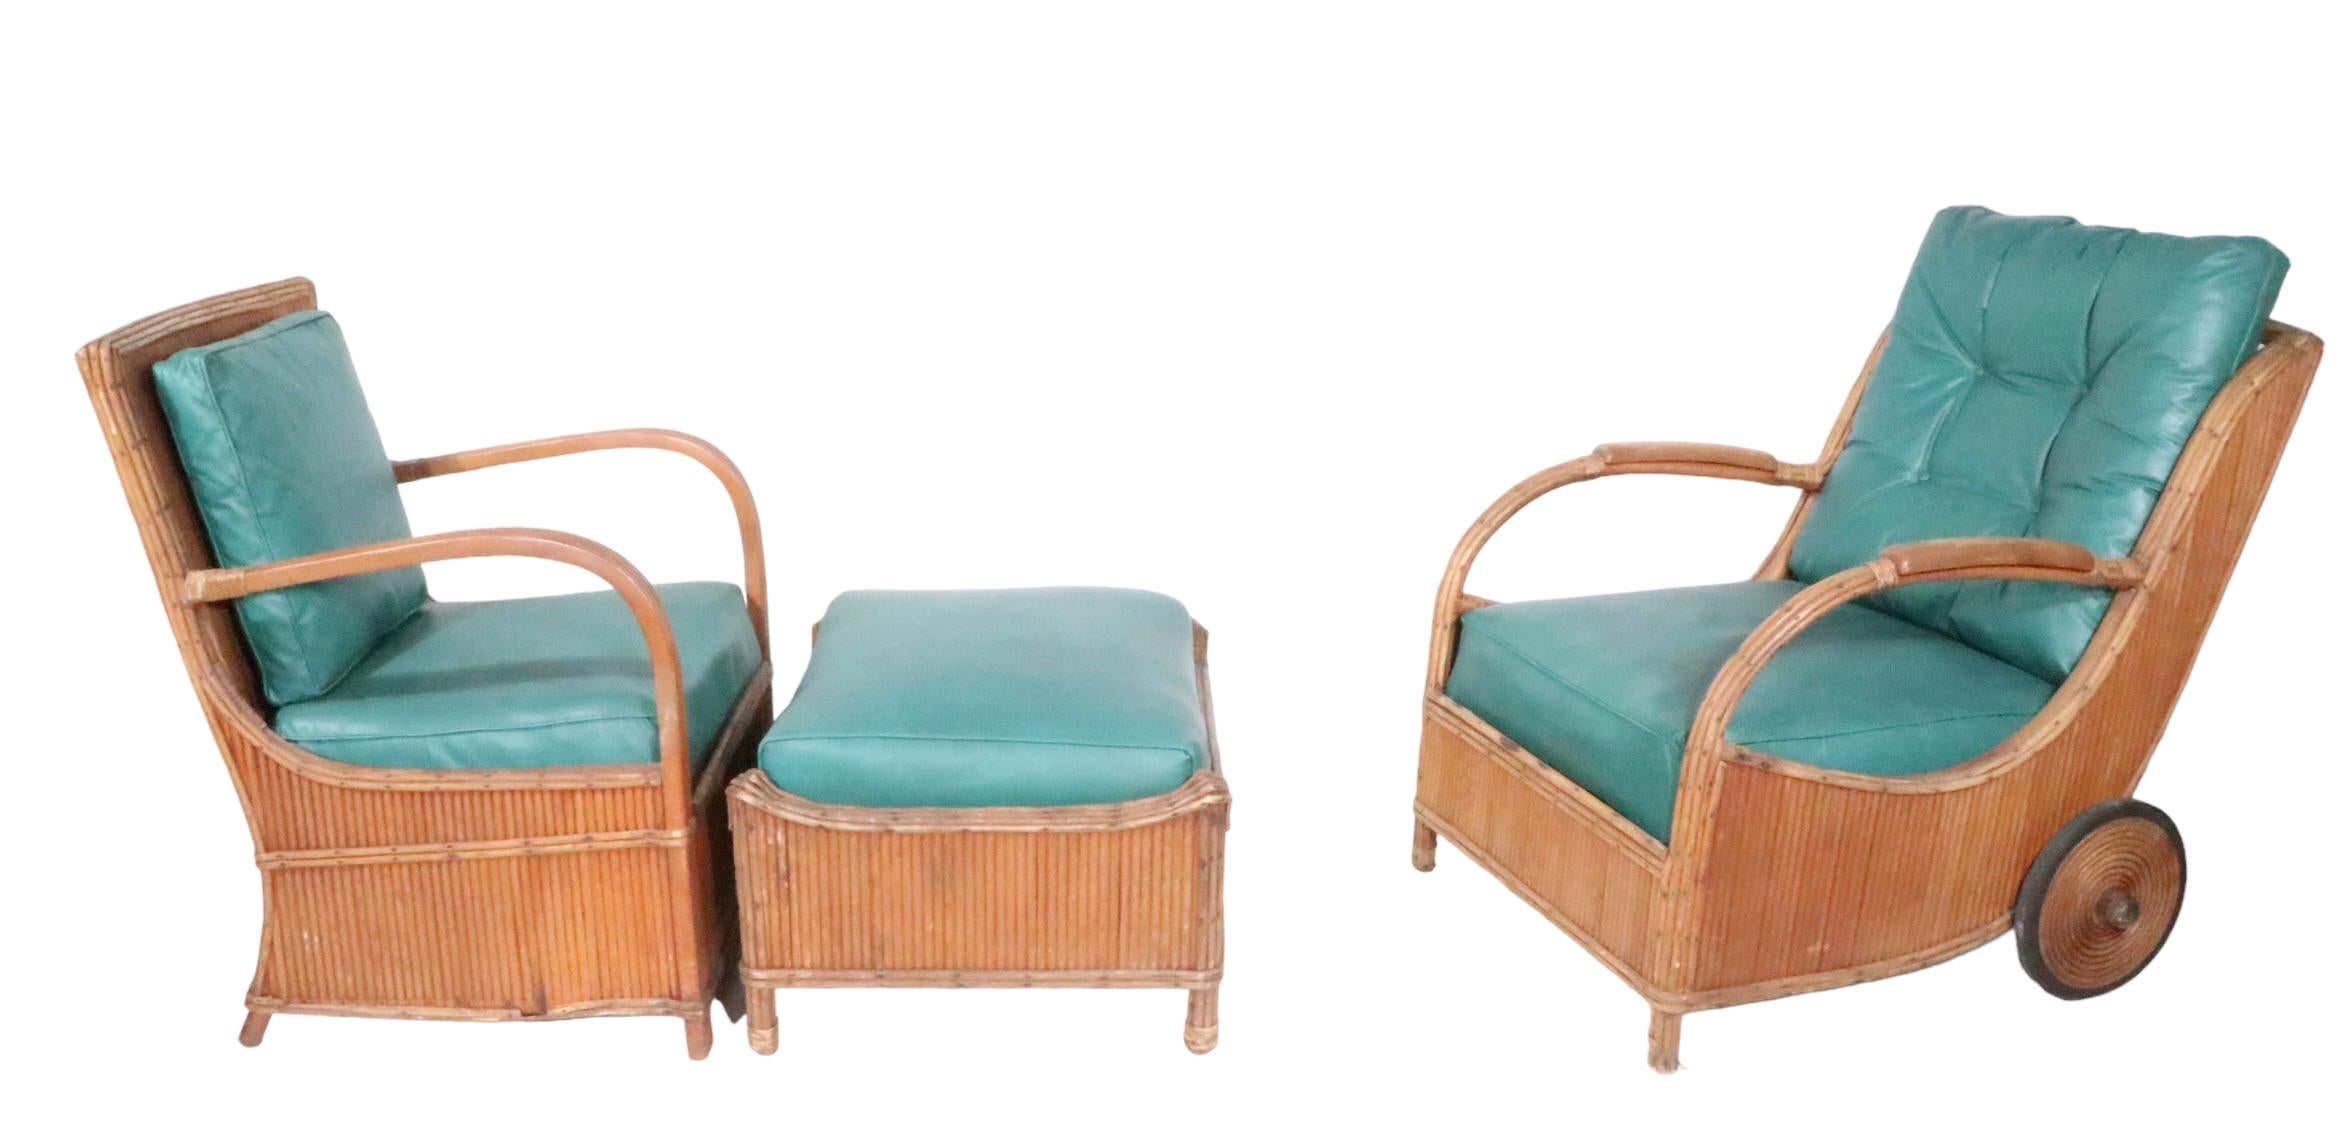 Four Piece Group of Art Deco Rattan Pencil Reed Wicker by the American Chair Co. For Sale 5